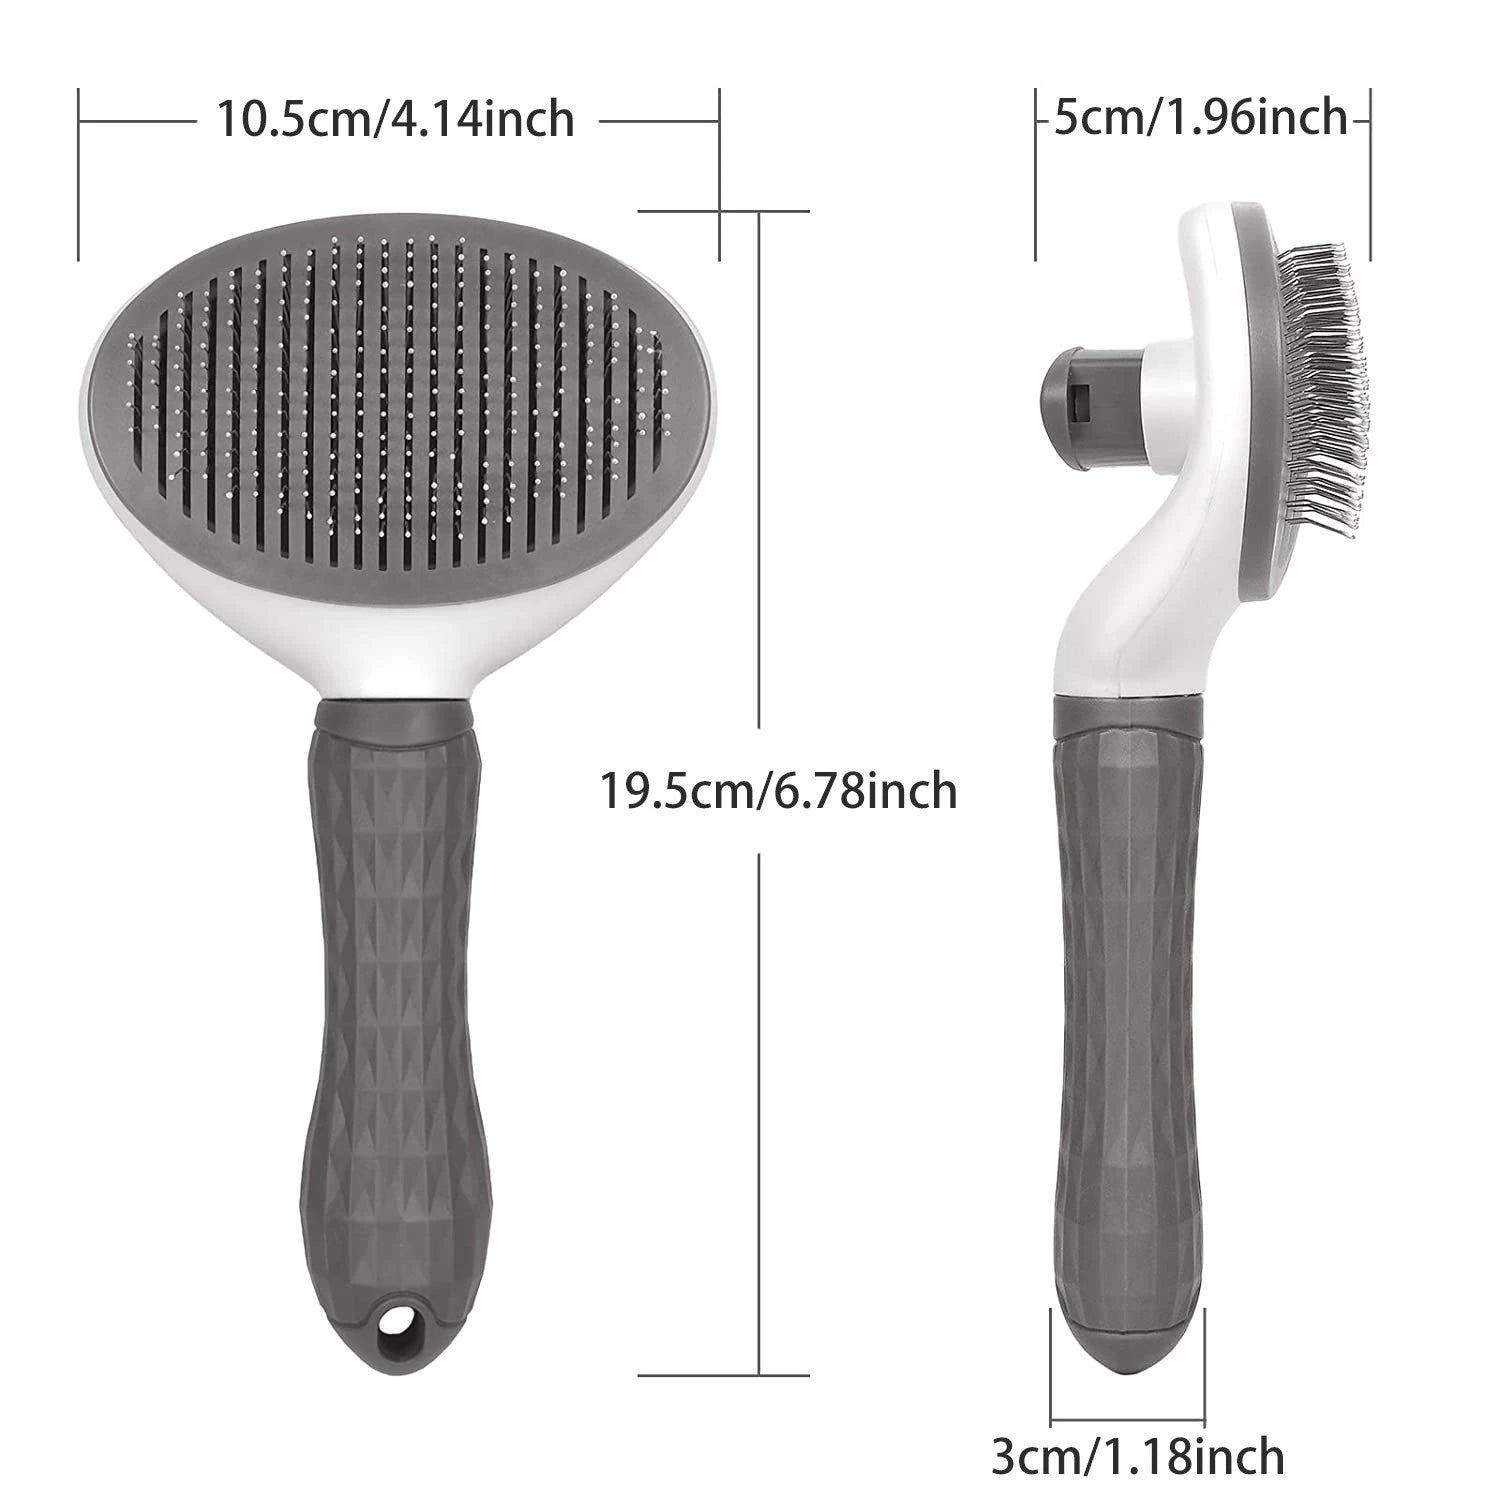 "Ultimate Pet Grooming Tool: Self-Cleaning Brush for Dogs and Cats - Say Goodbye to Pet Hair with Ease!"